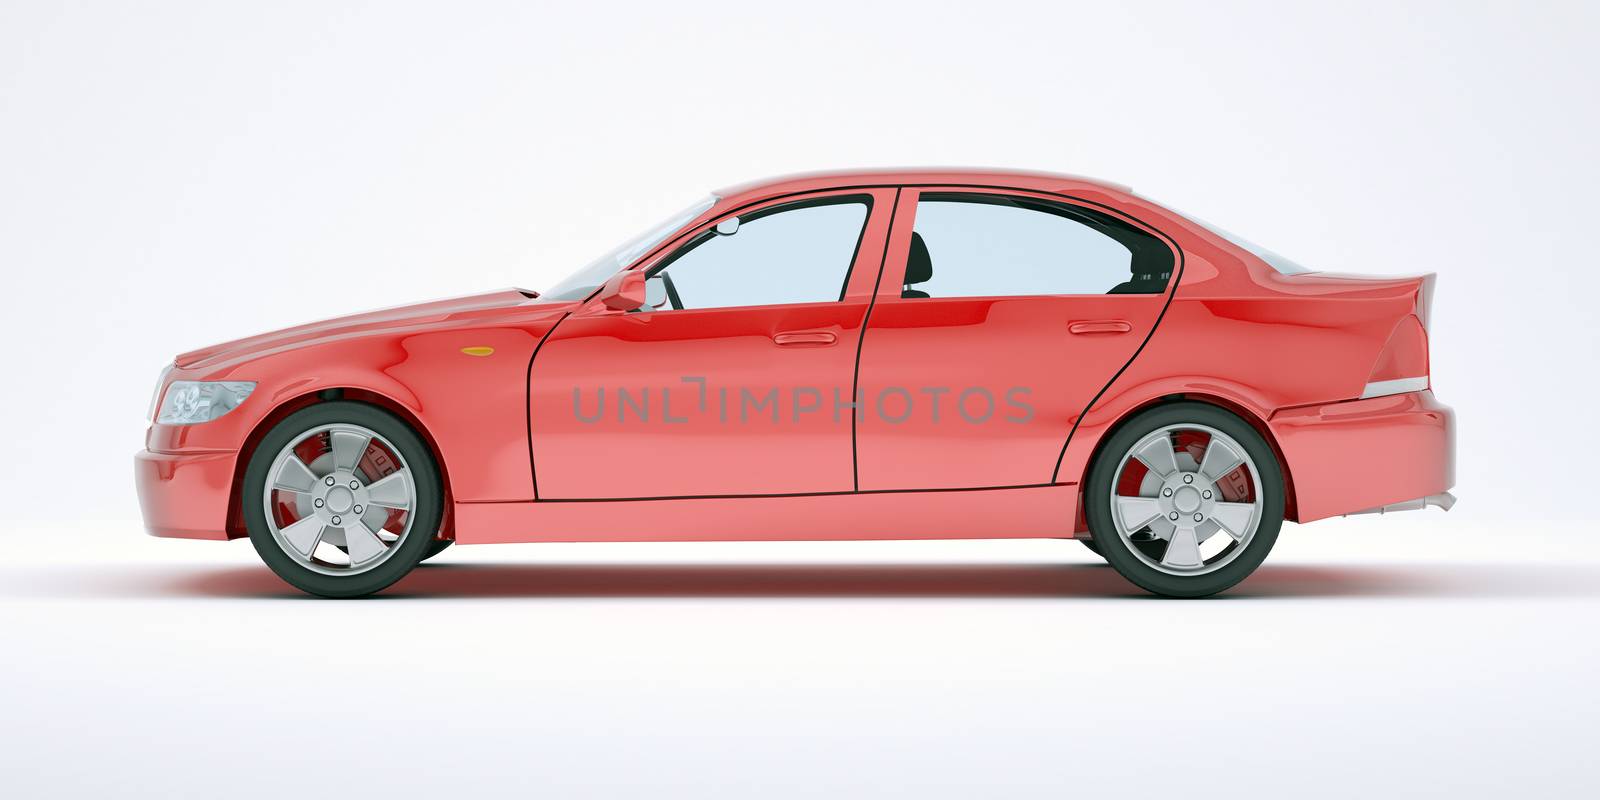 Red car on isolated white background, side view